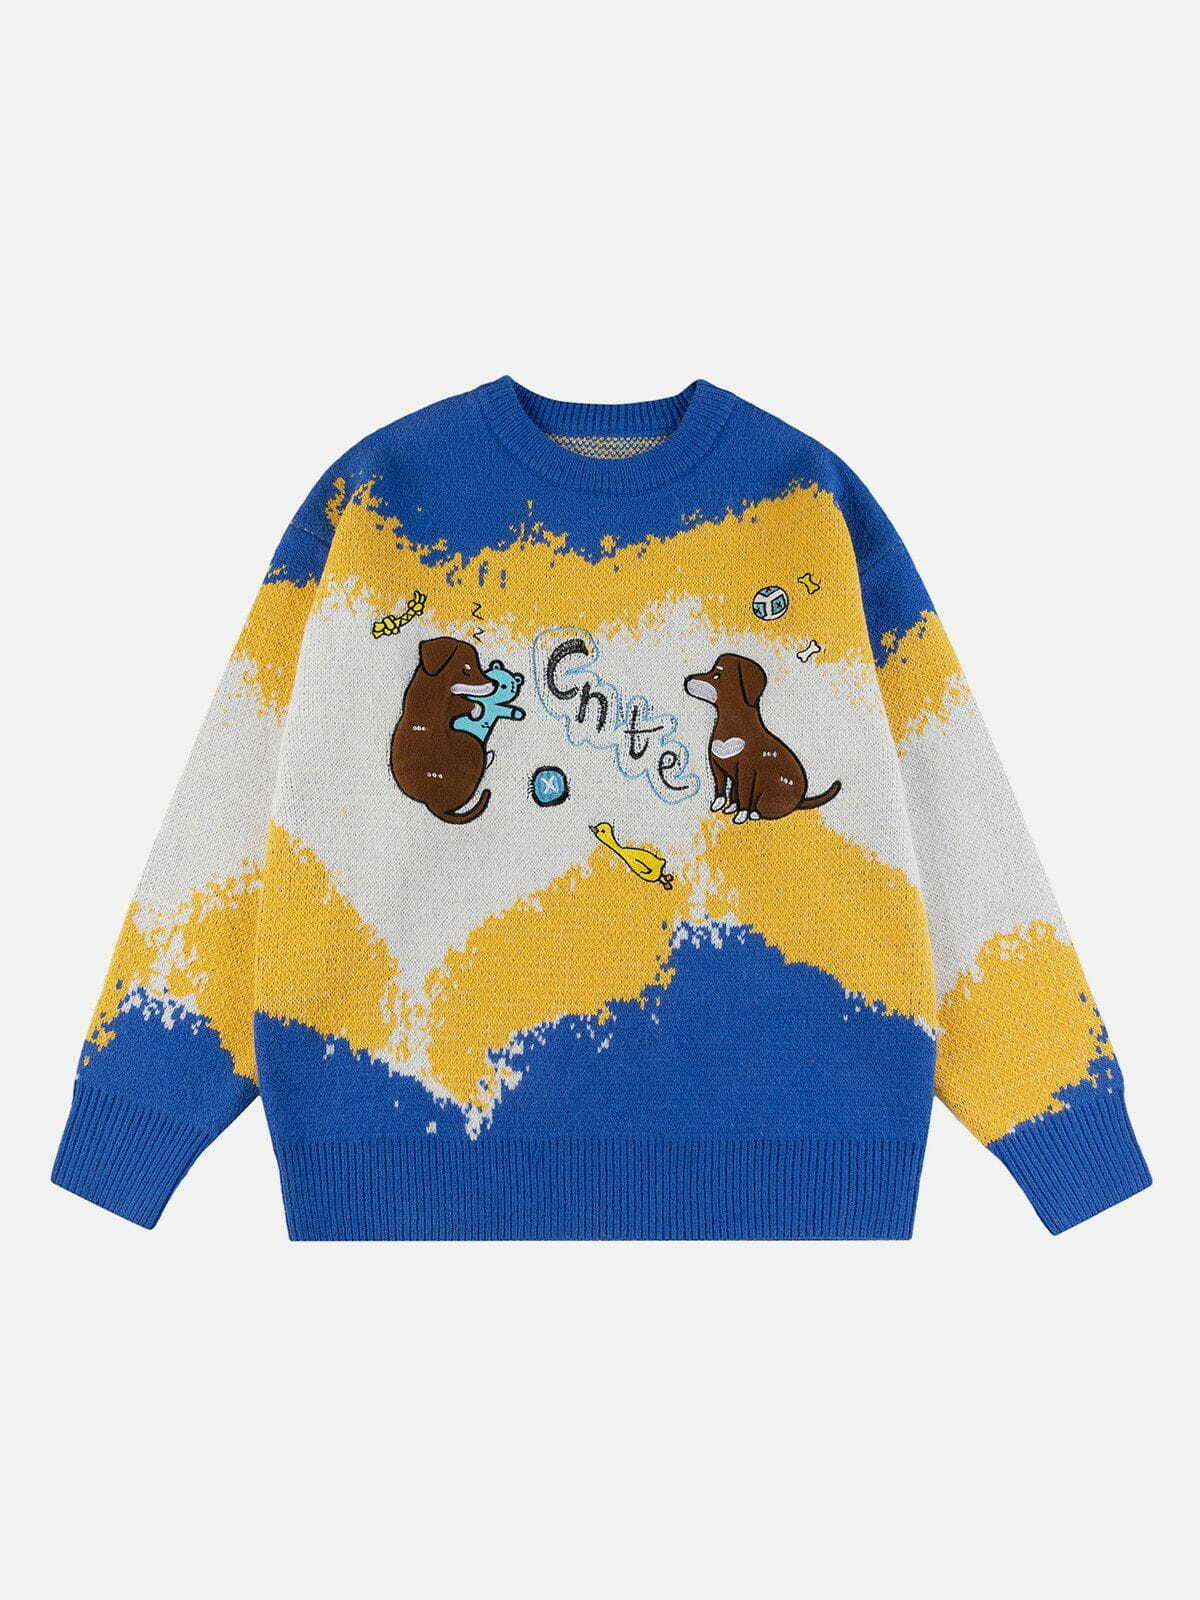 embroidered puppy sweater quirky y2k fashion essential 2853